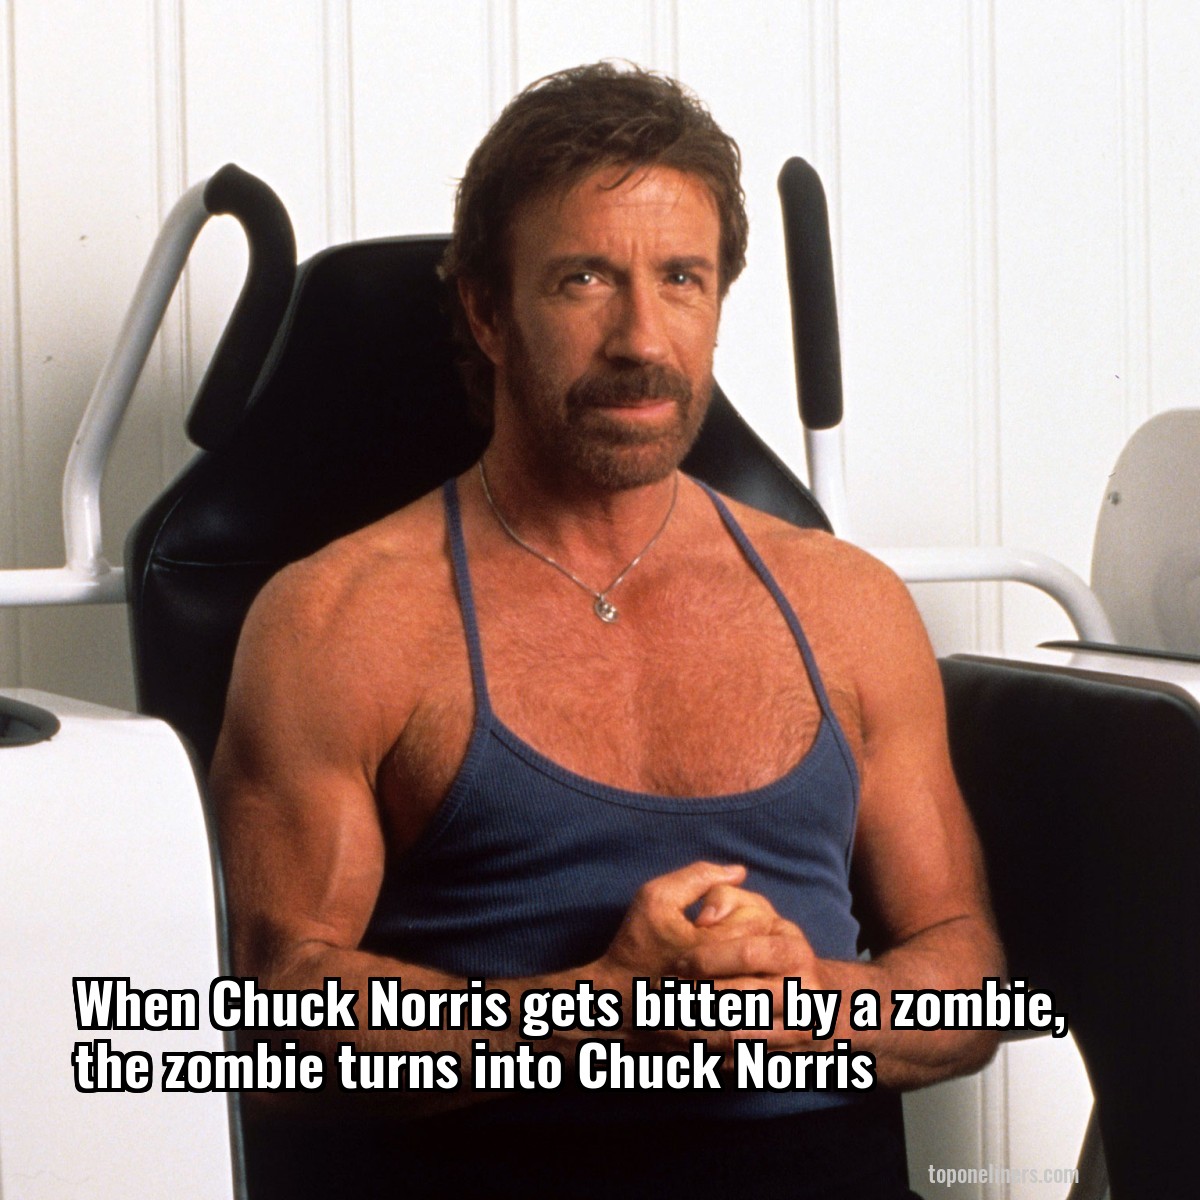 When Chuck Norris gets bitten by a zombie, the zombie turns into Chuck Norris